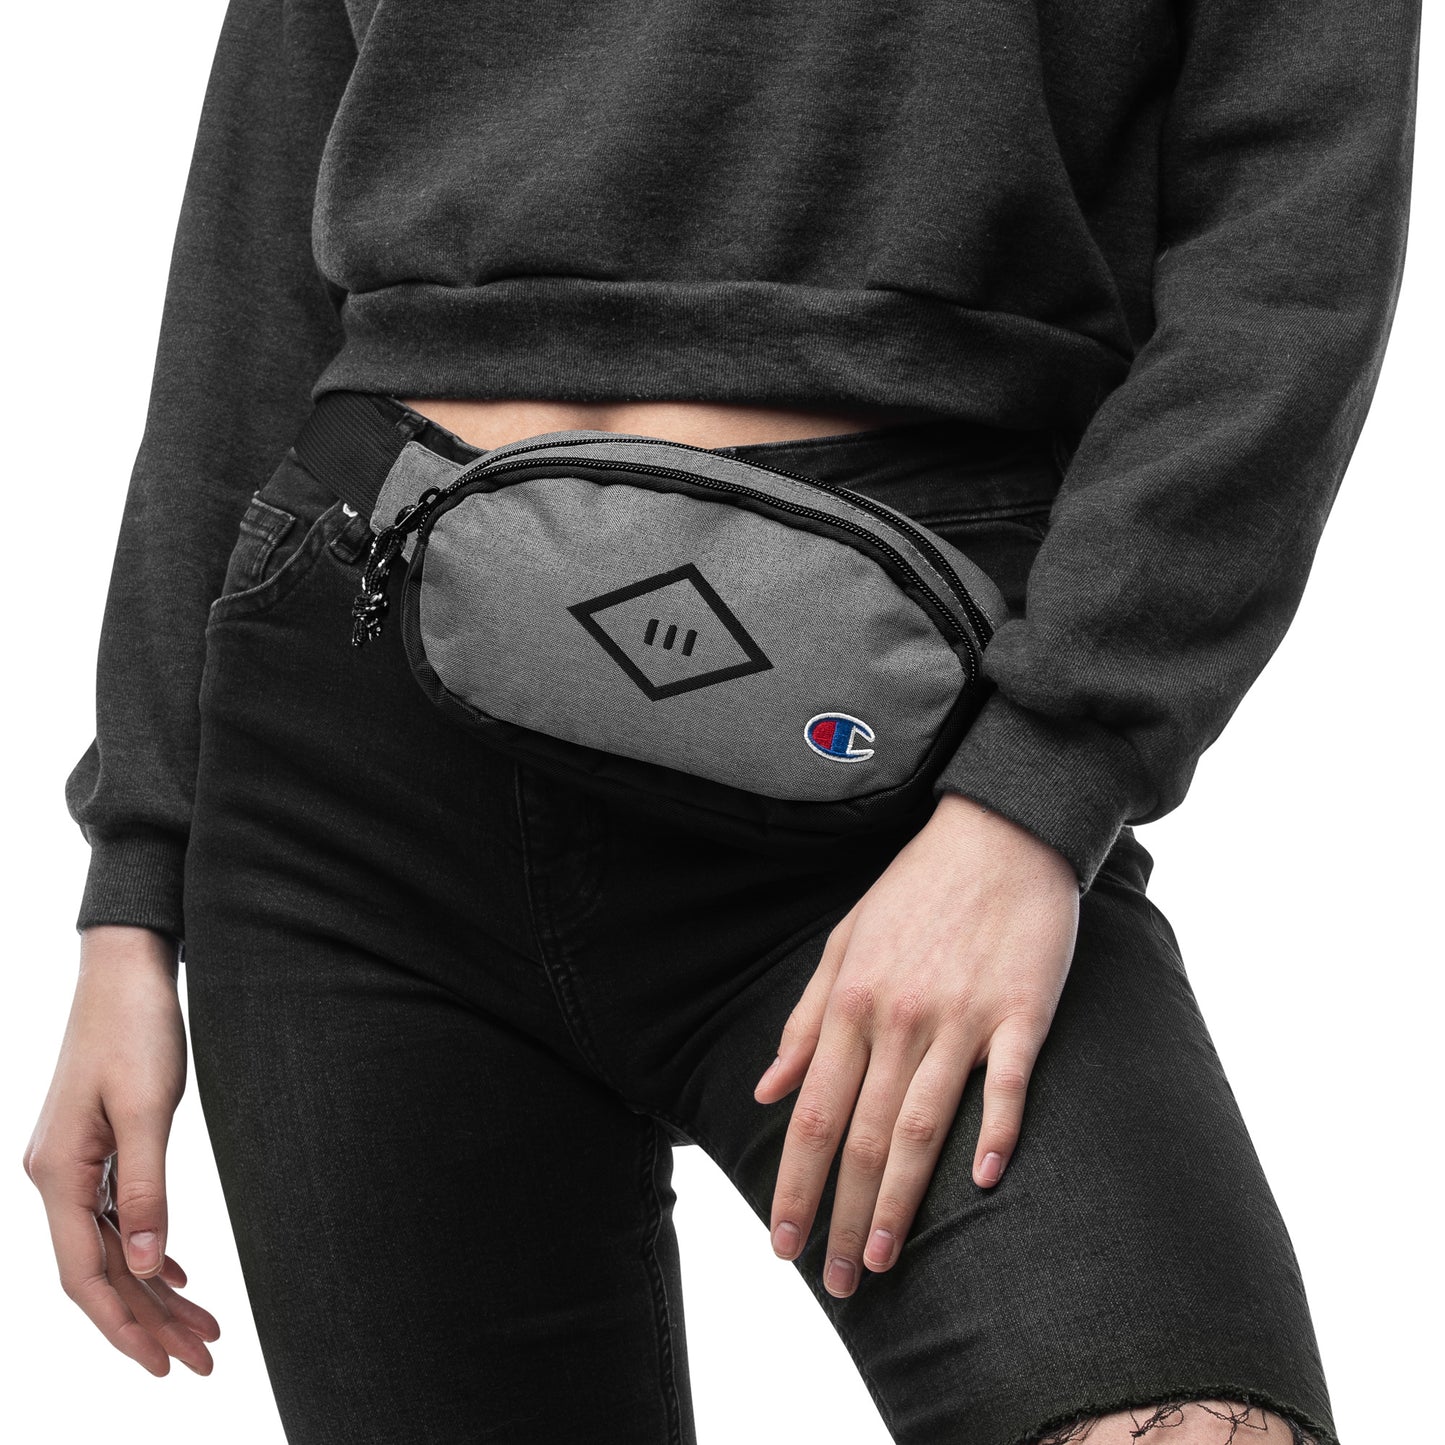 chicks can wear fanny packs too